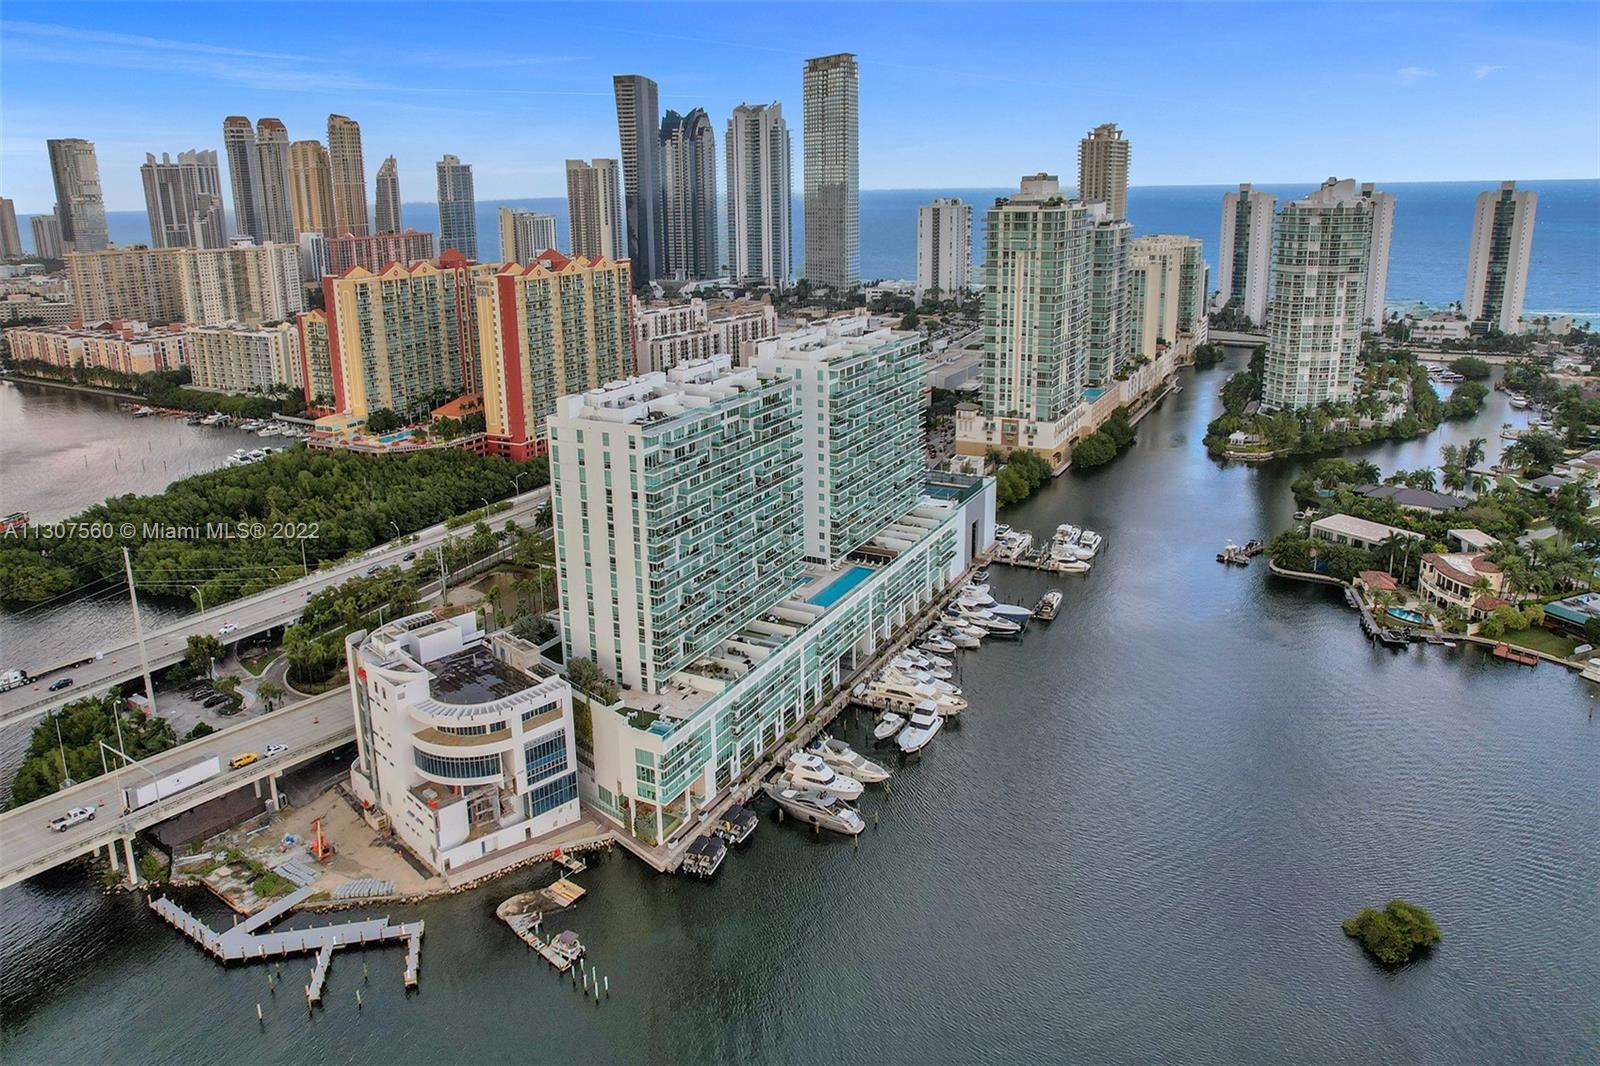 Breathtaking Million Dollar views from all rooms over Intracoastal, Oleta River Park, and Ocean. 169